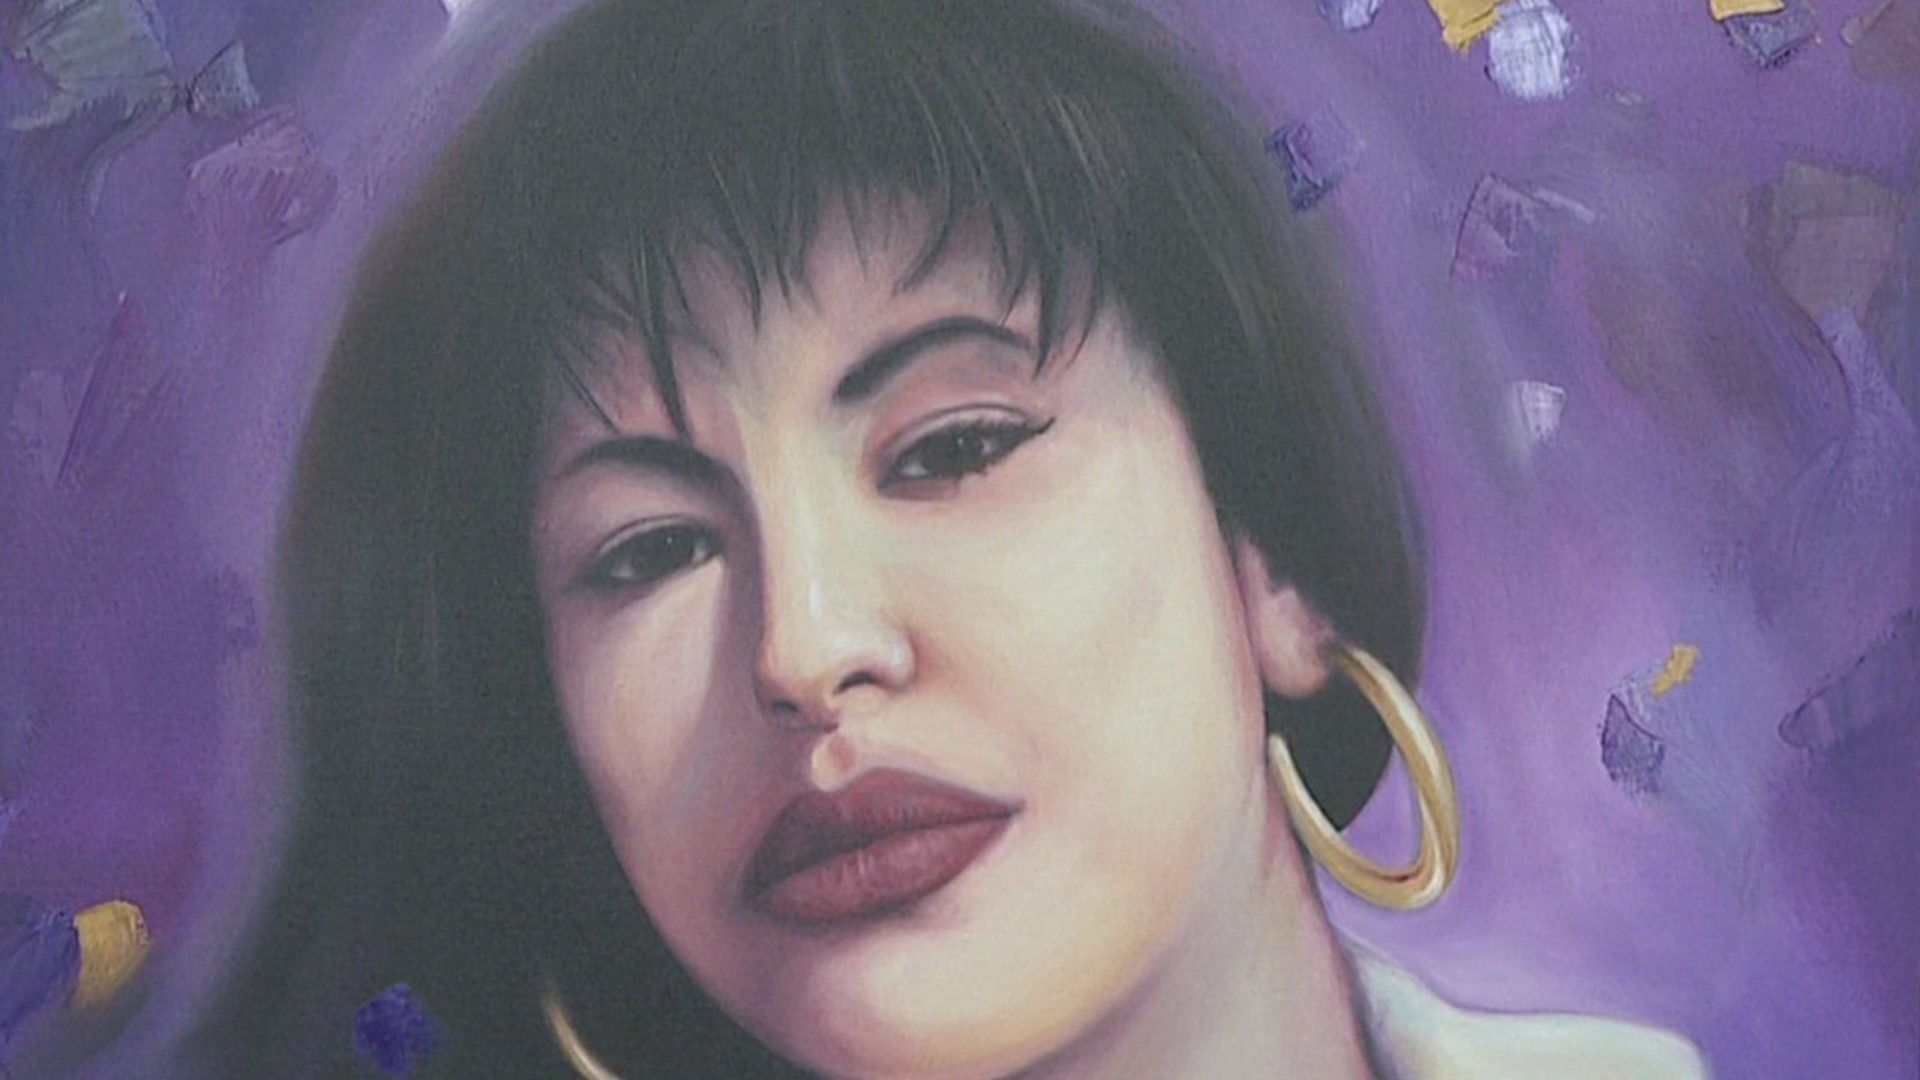 A special gift was presented to Corpus Christi's City Council Tuesday courtesy of CITGO refineries -- a painting of Selena!